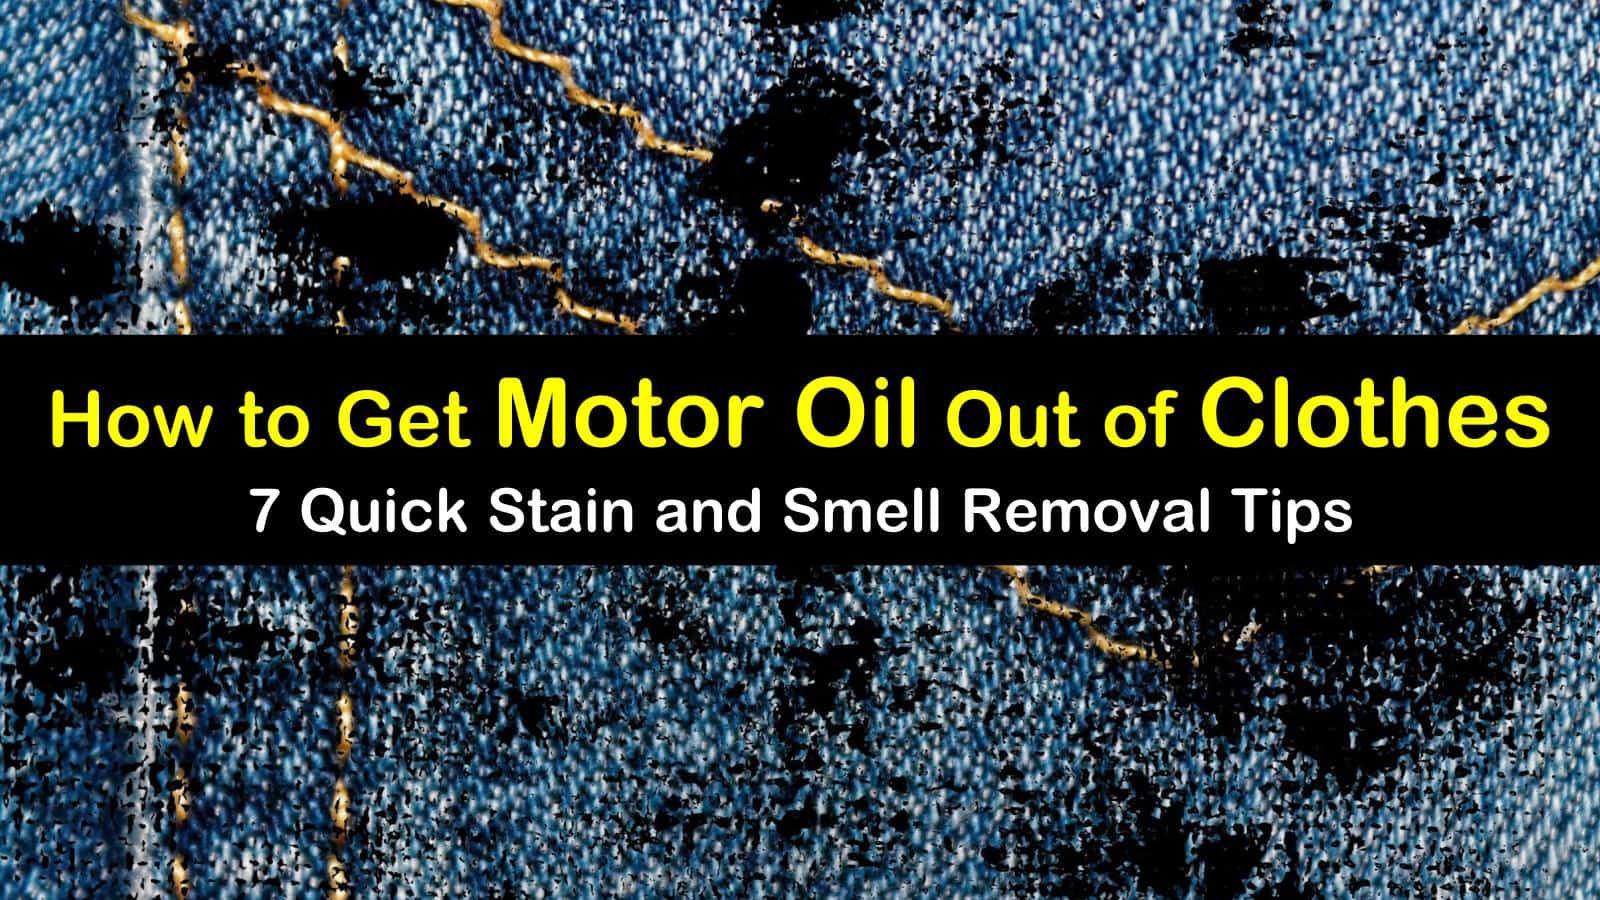 how to get motor oil out of clothes titleimg1